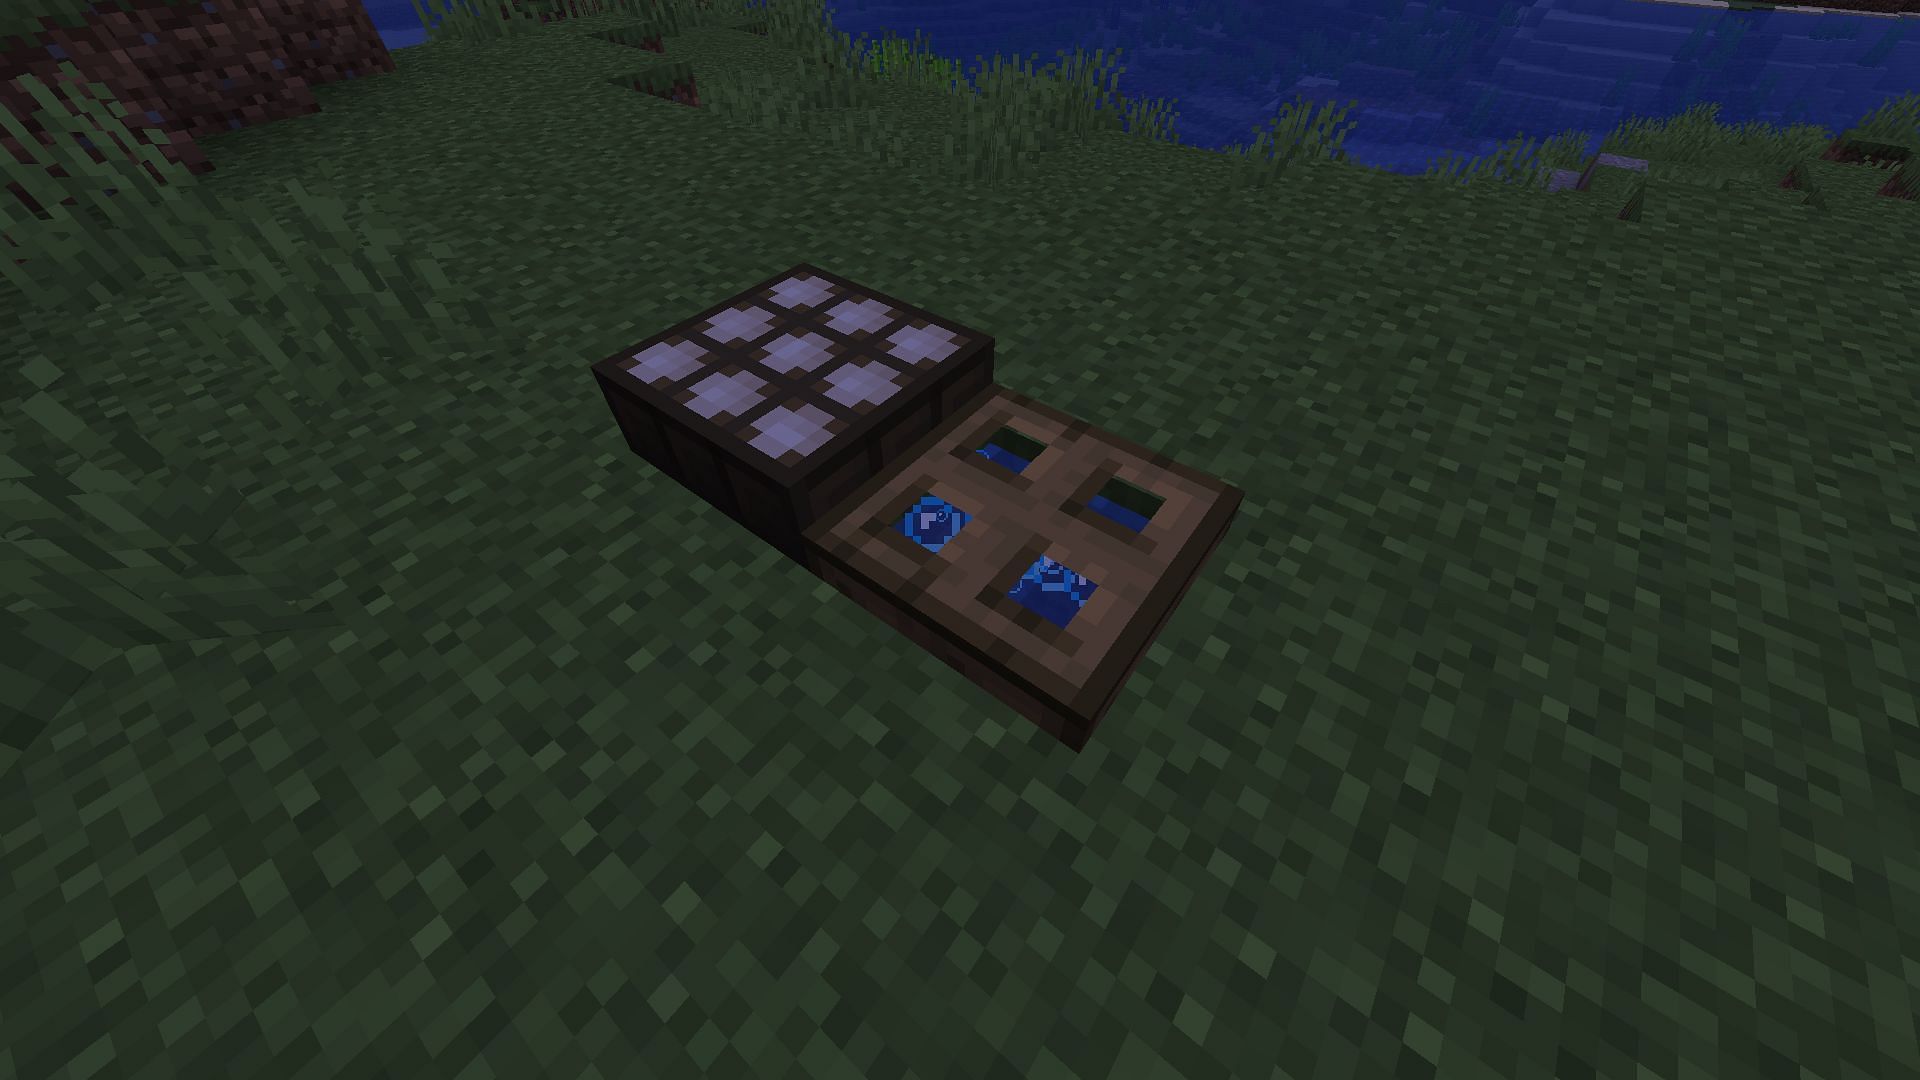 How to make ender pearl stasis chamber in Minecraft